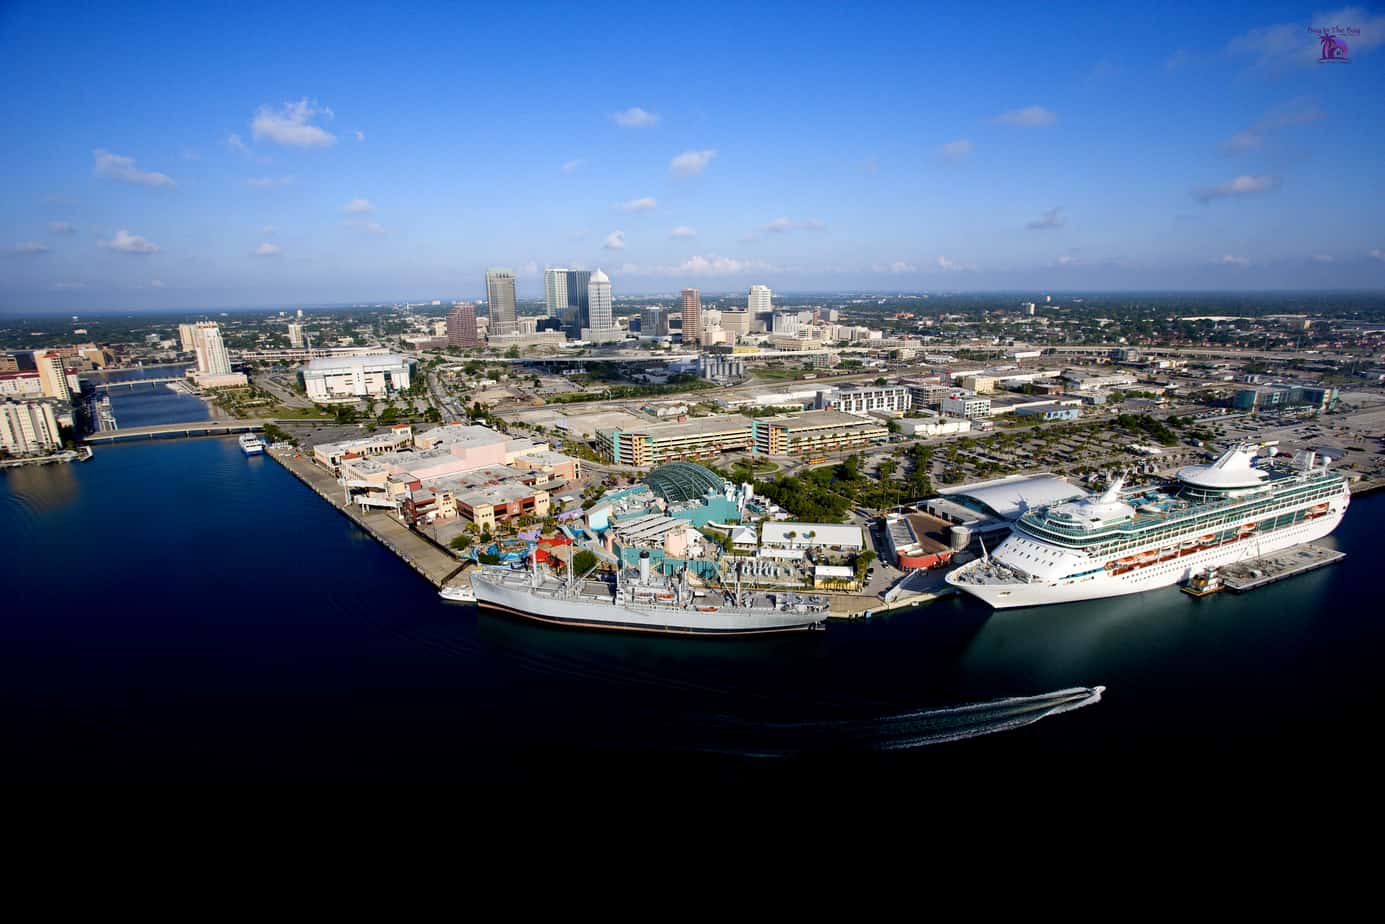 skyline view of hillsborough county florida with tampa skyline and cruise ships showing some hillsborough county homes for sale